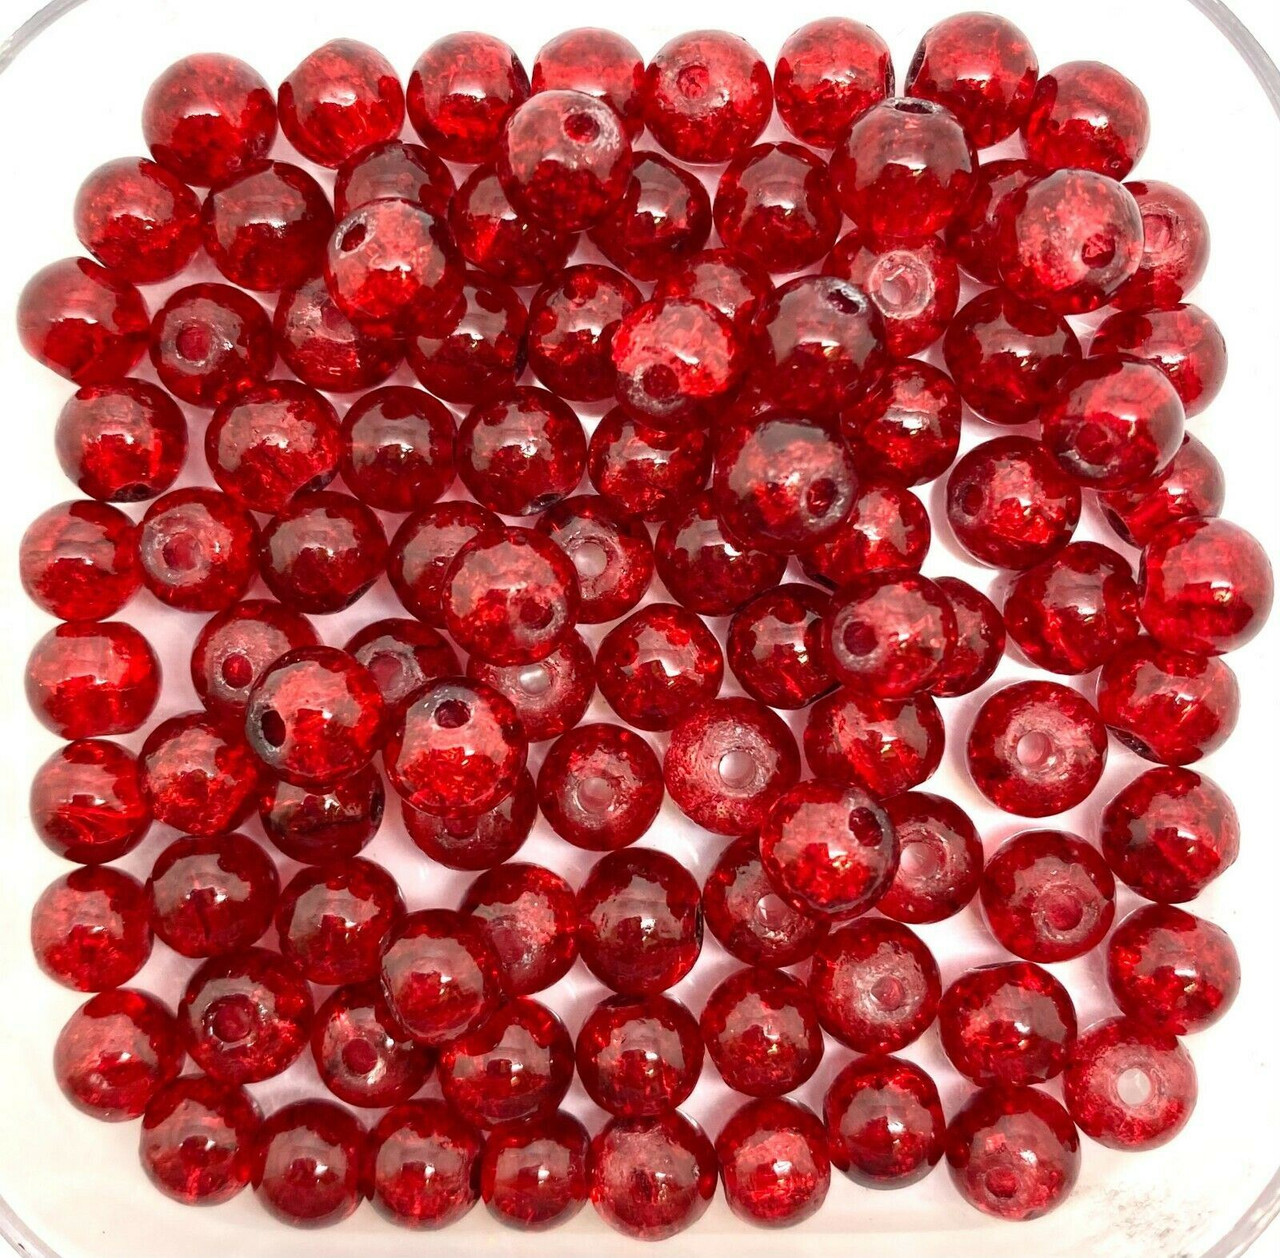 8mm Crackle Glass Beads - Dark Red, 50 beads